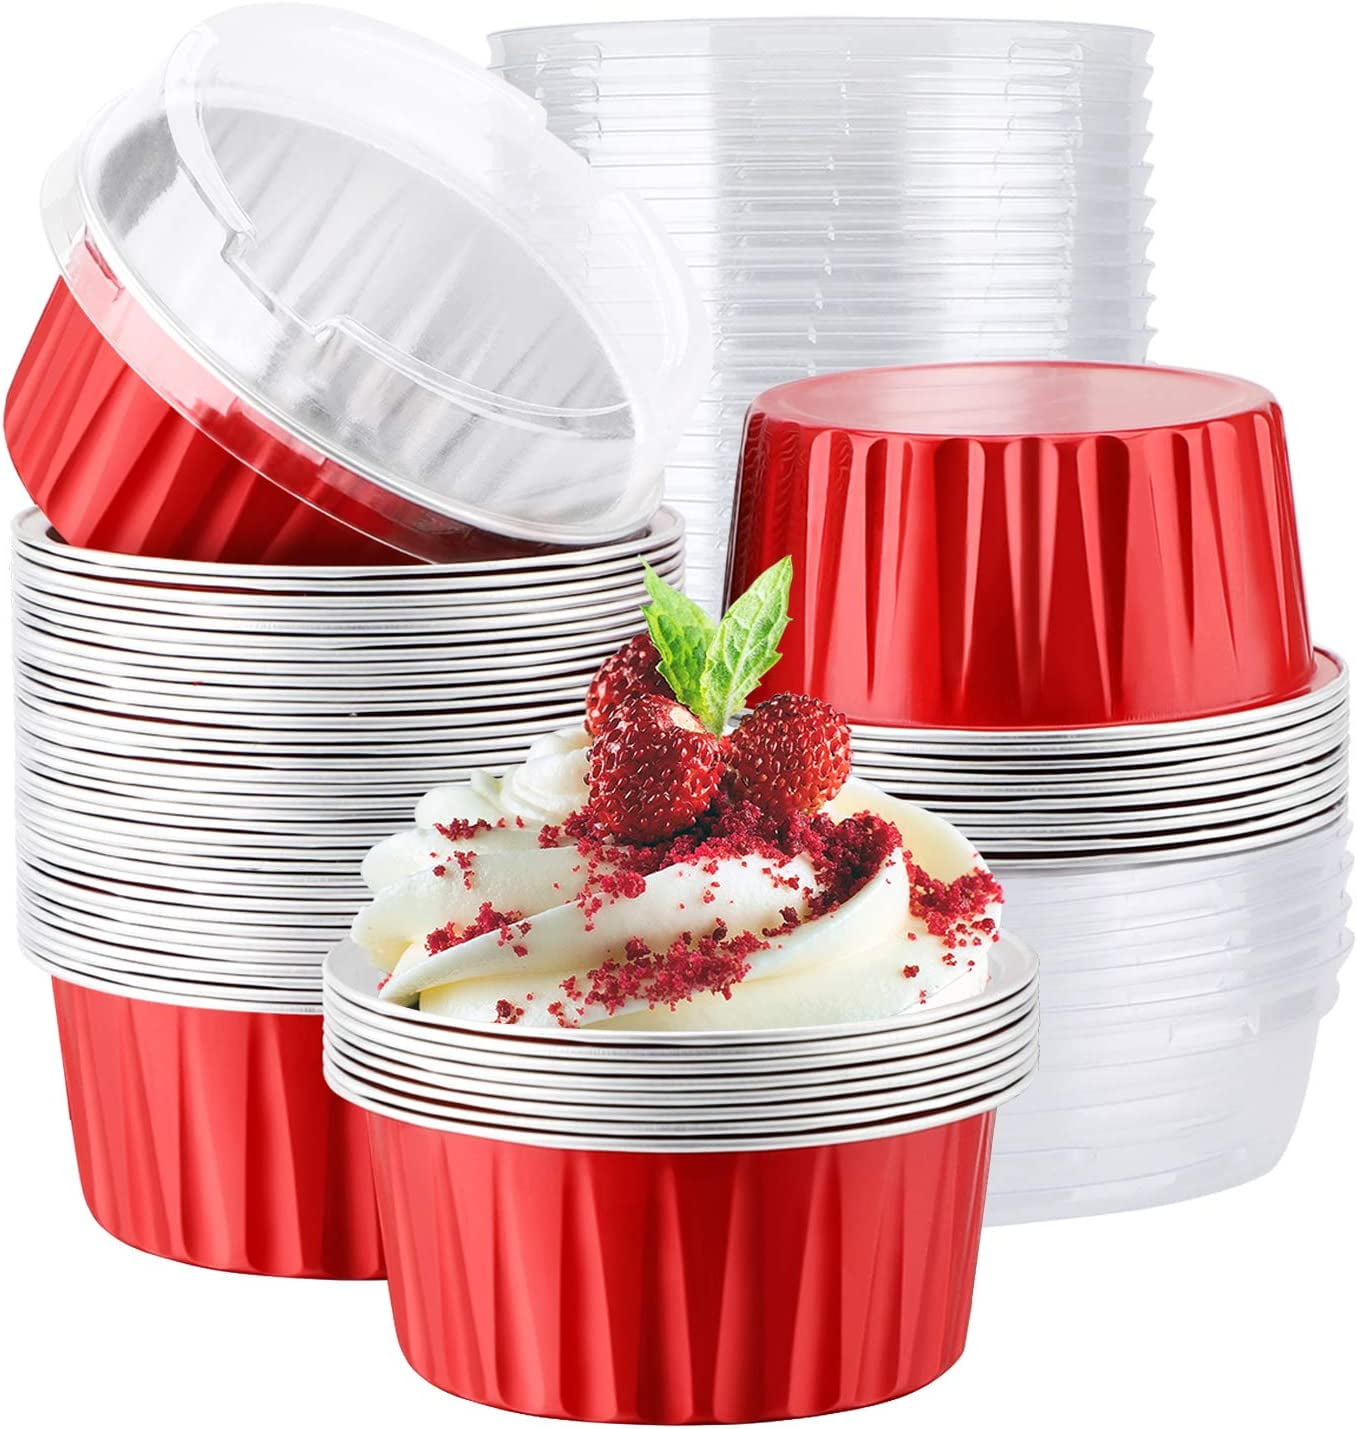 10oz Mini Cake Pans With Lids 40 Pack,LNYZQUS Aluminum Foil Square Cupcake  Liners Brownie Baking Cups,Disposable 4”x4” Large Cupcake Pan,Jumbo Muffin